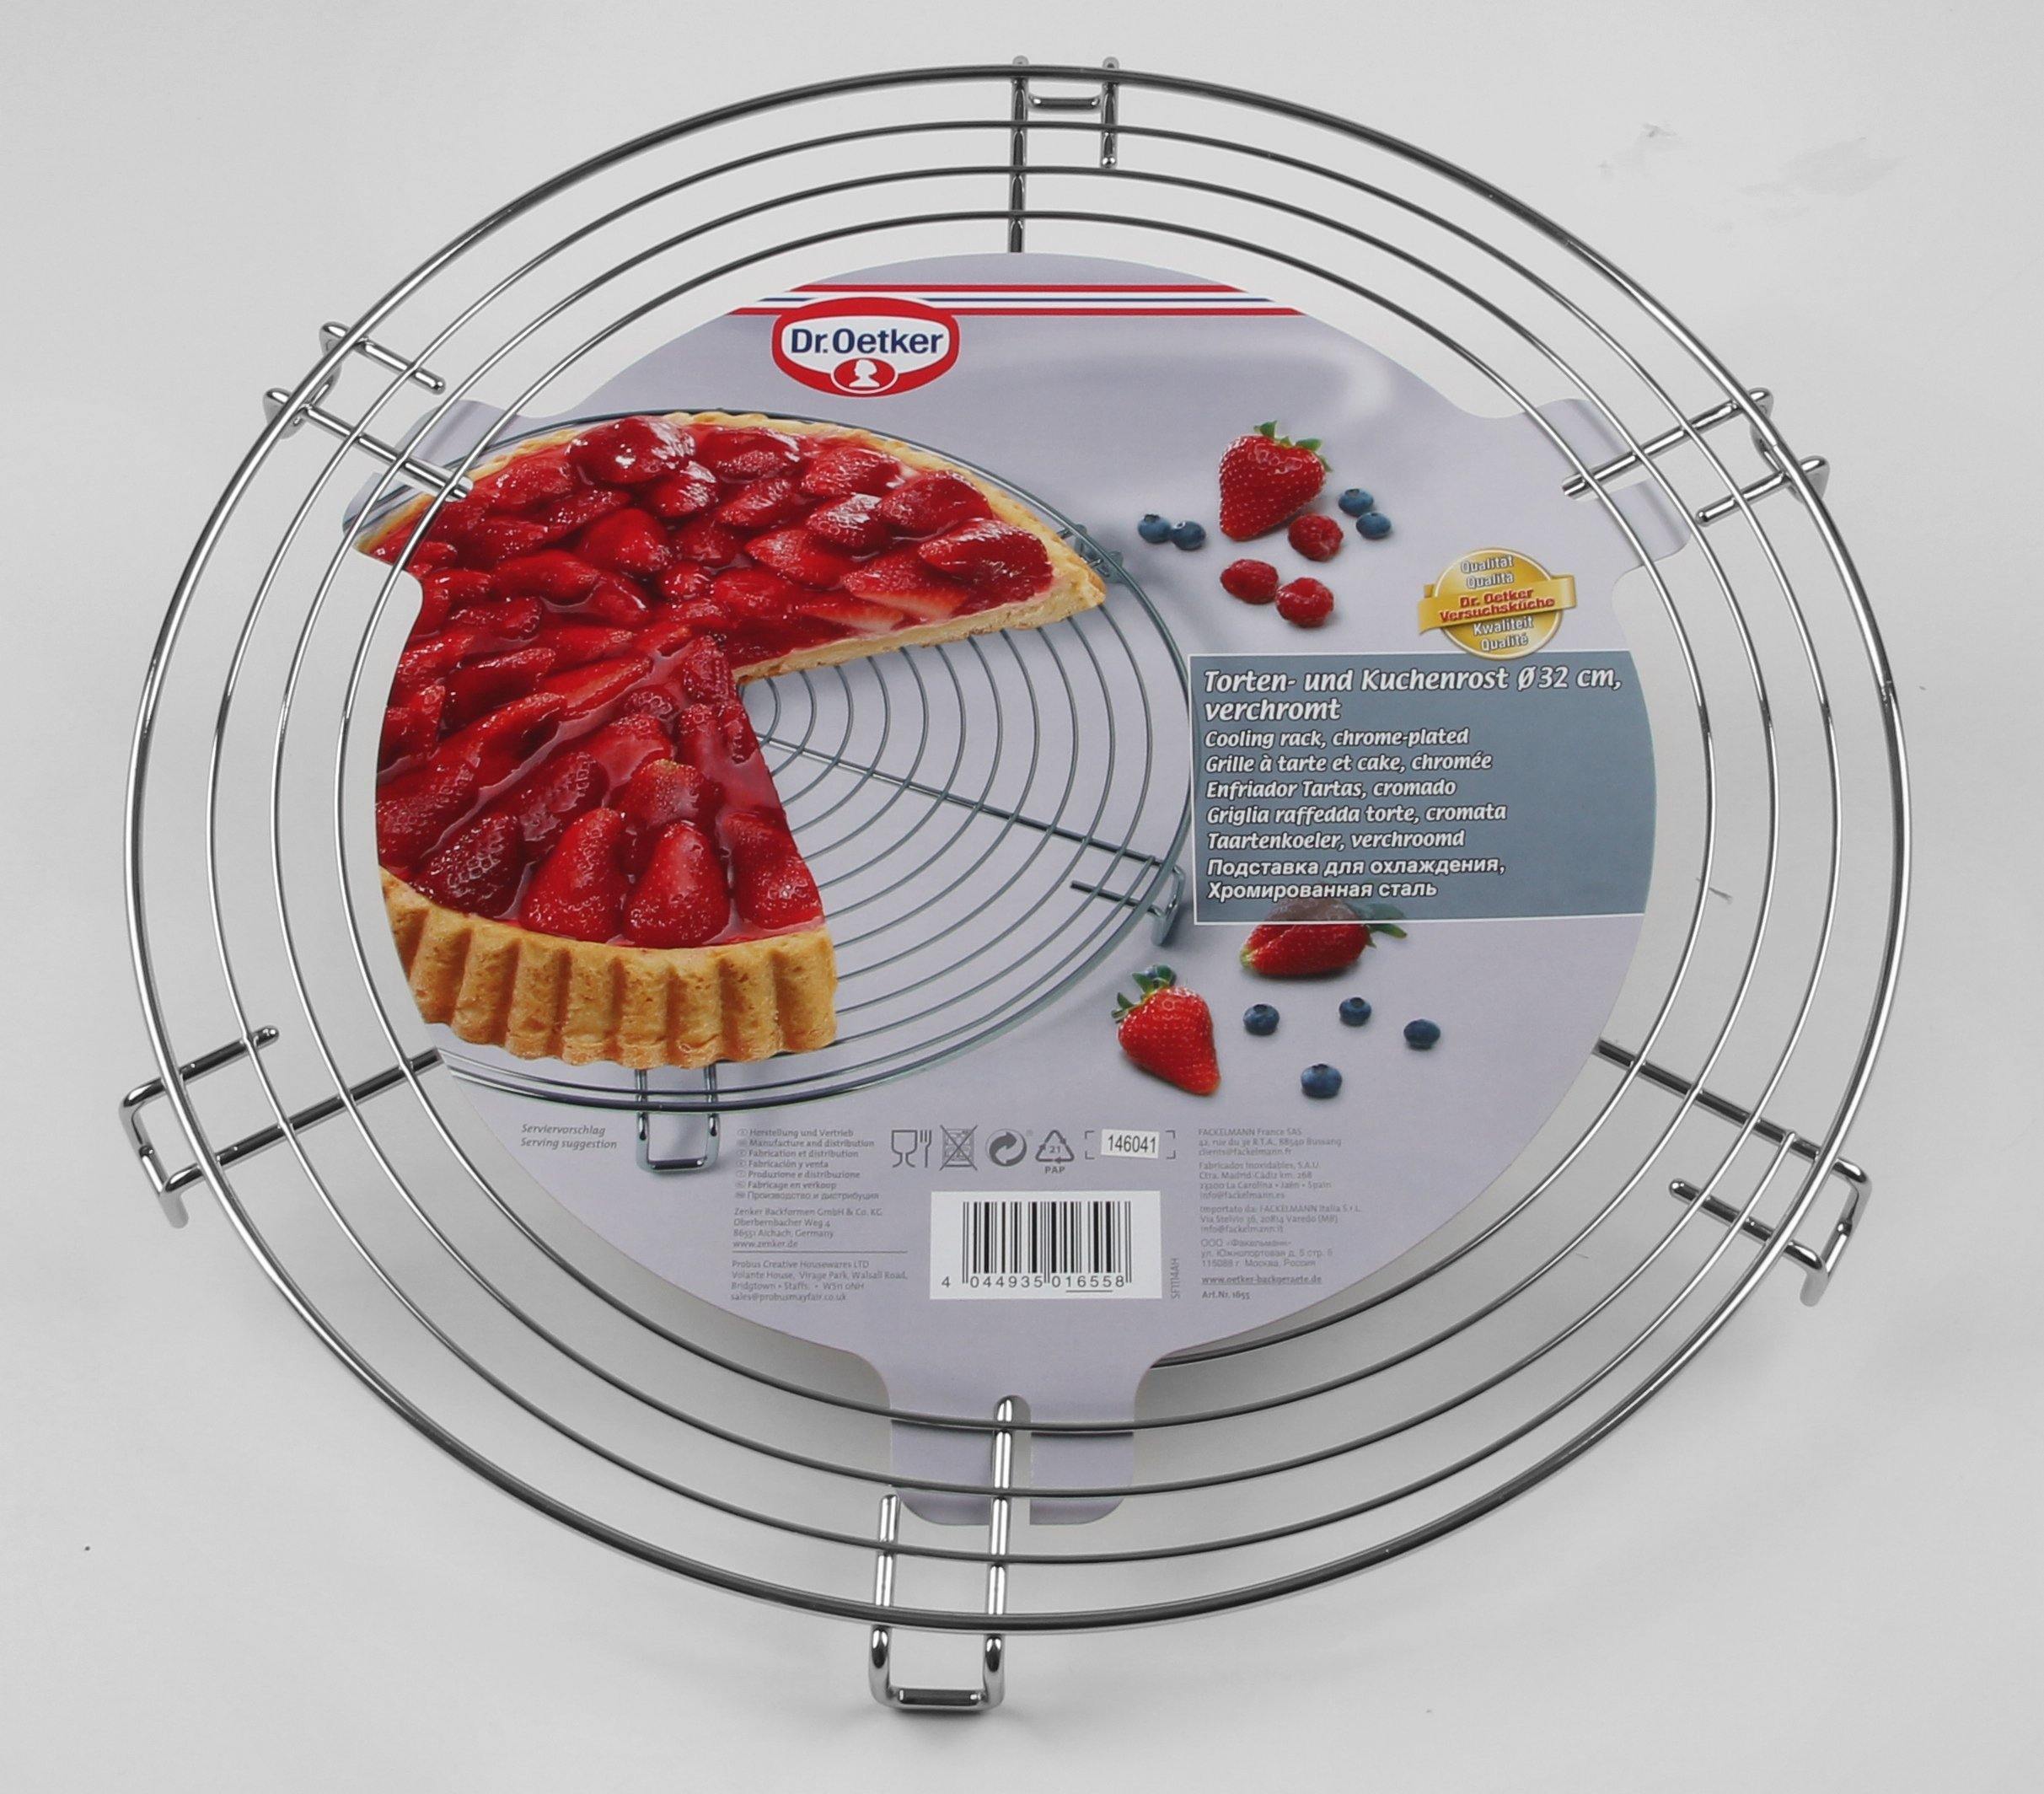 Dr. Oetker Cooling Rack, Chrome-Plated, Silver, 32 Cm - Whole and All